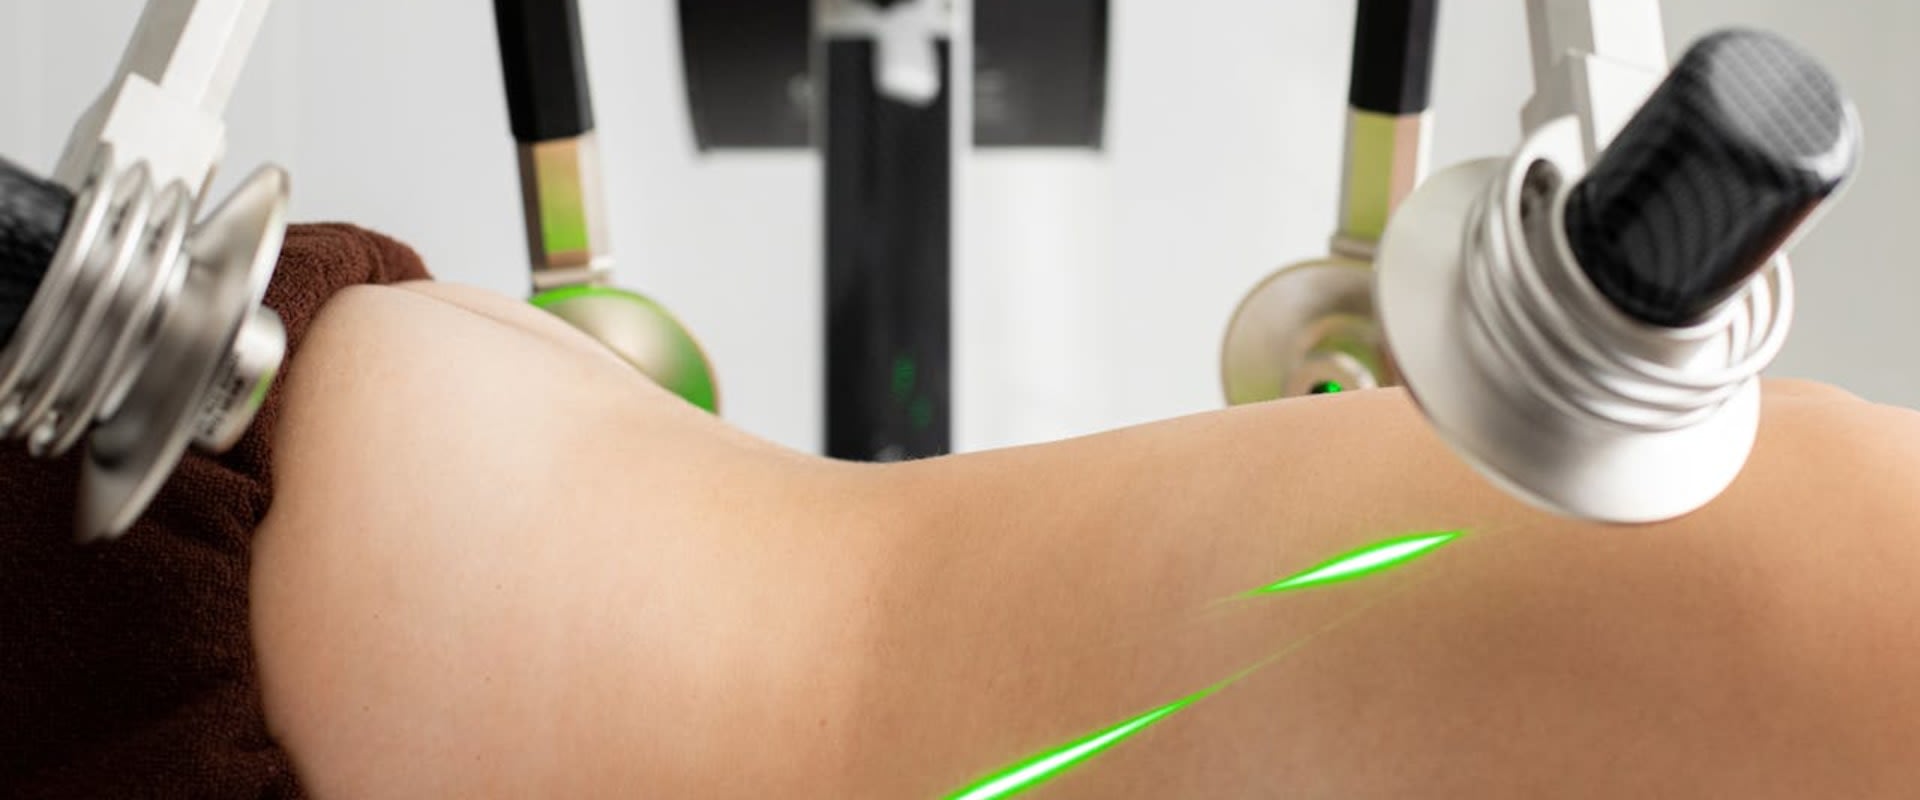 All About Laser Liposuction And Cold Laser Therapy In Stamford, CT